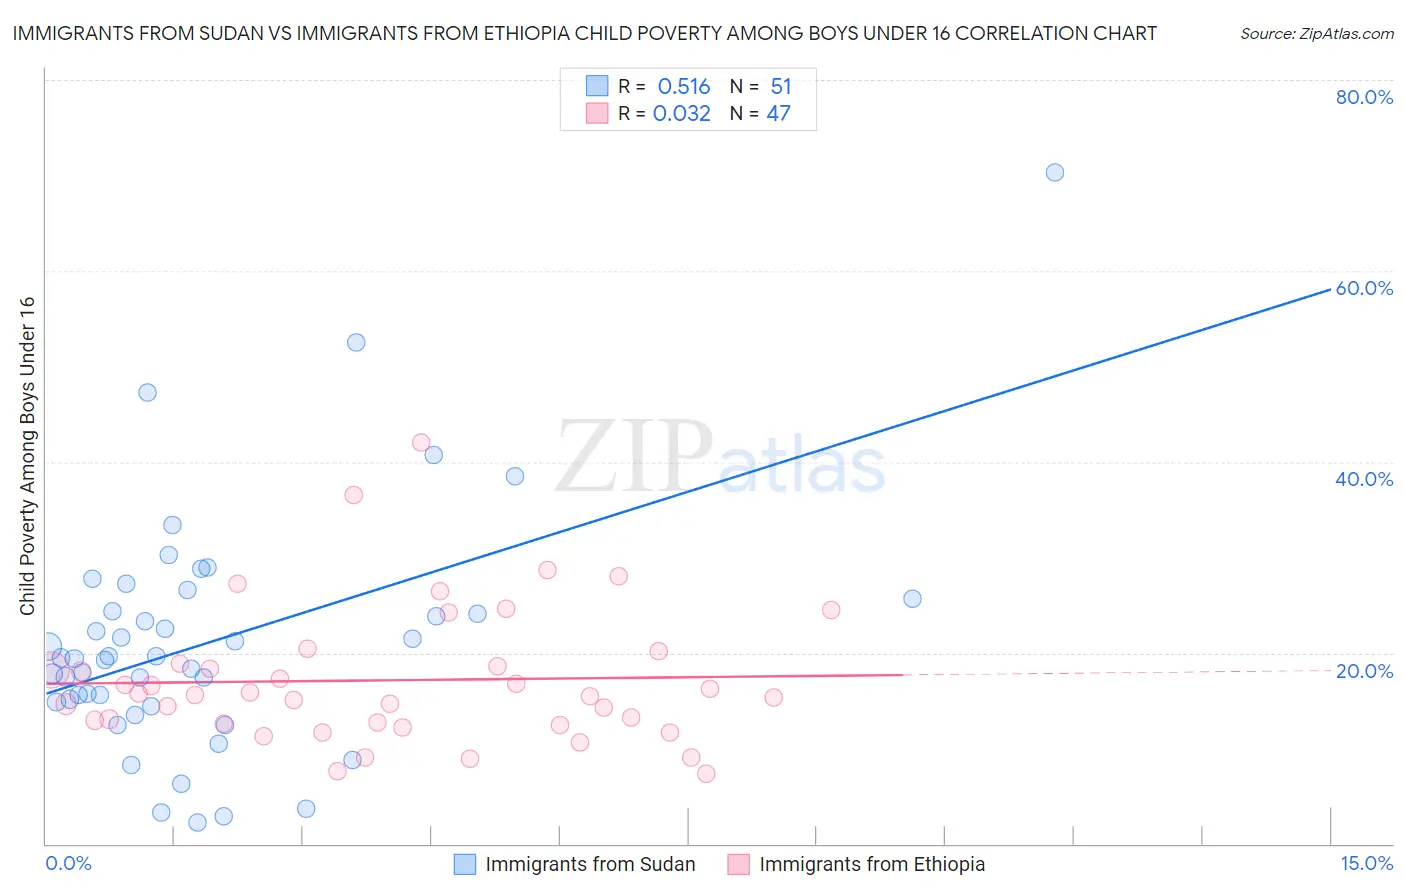 Immigrants from Sudan vs Immigrants from Ethiopia Child Poverty Among Boys Under 16